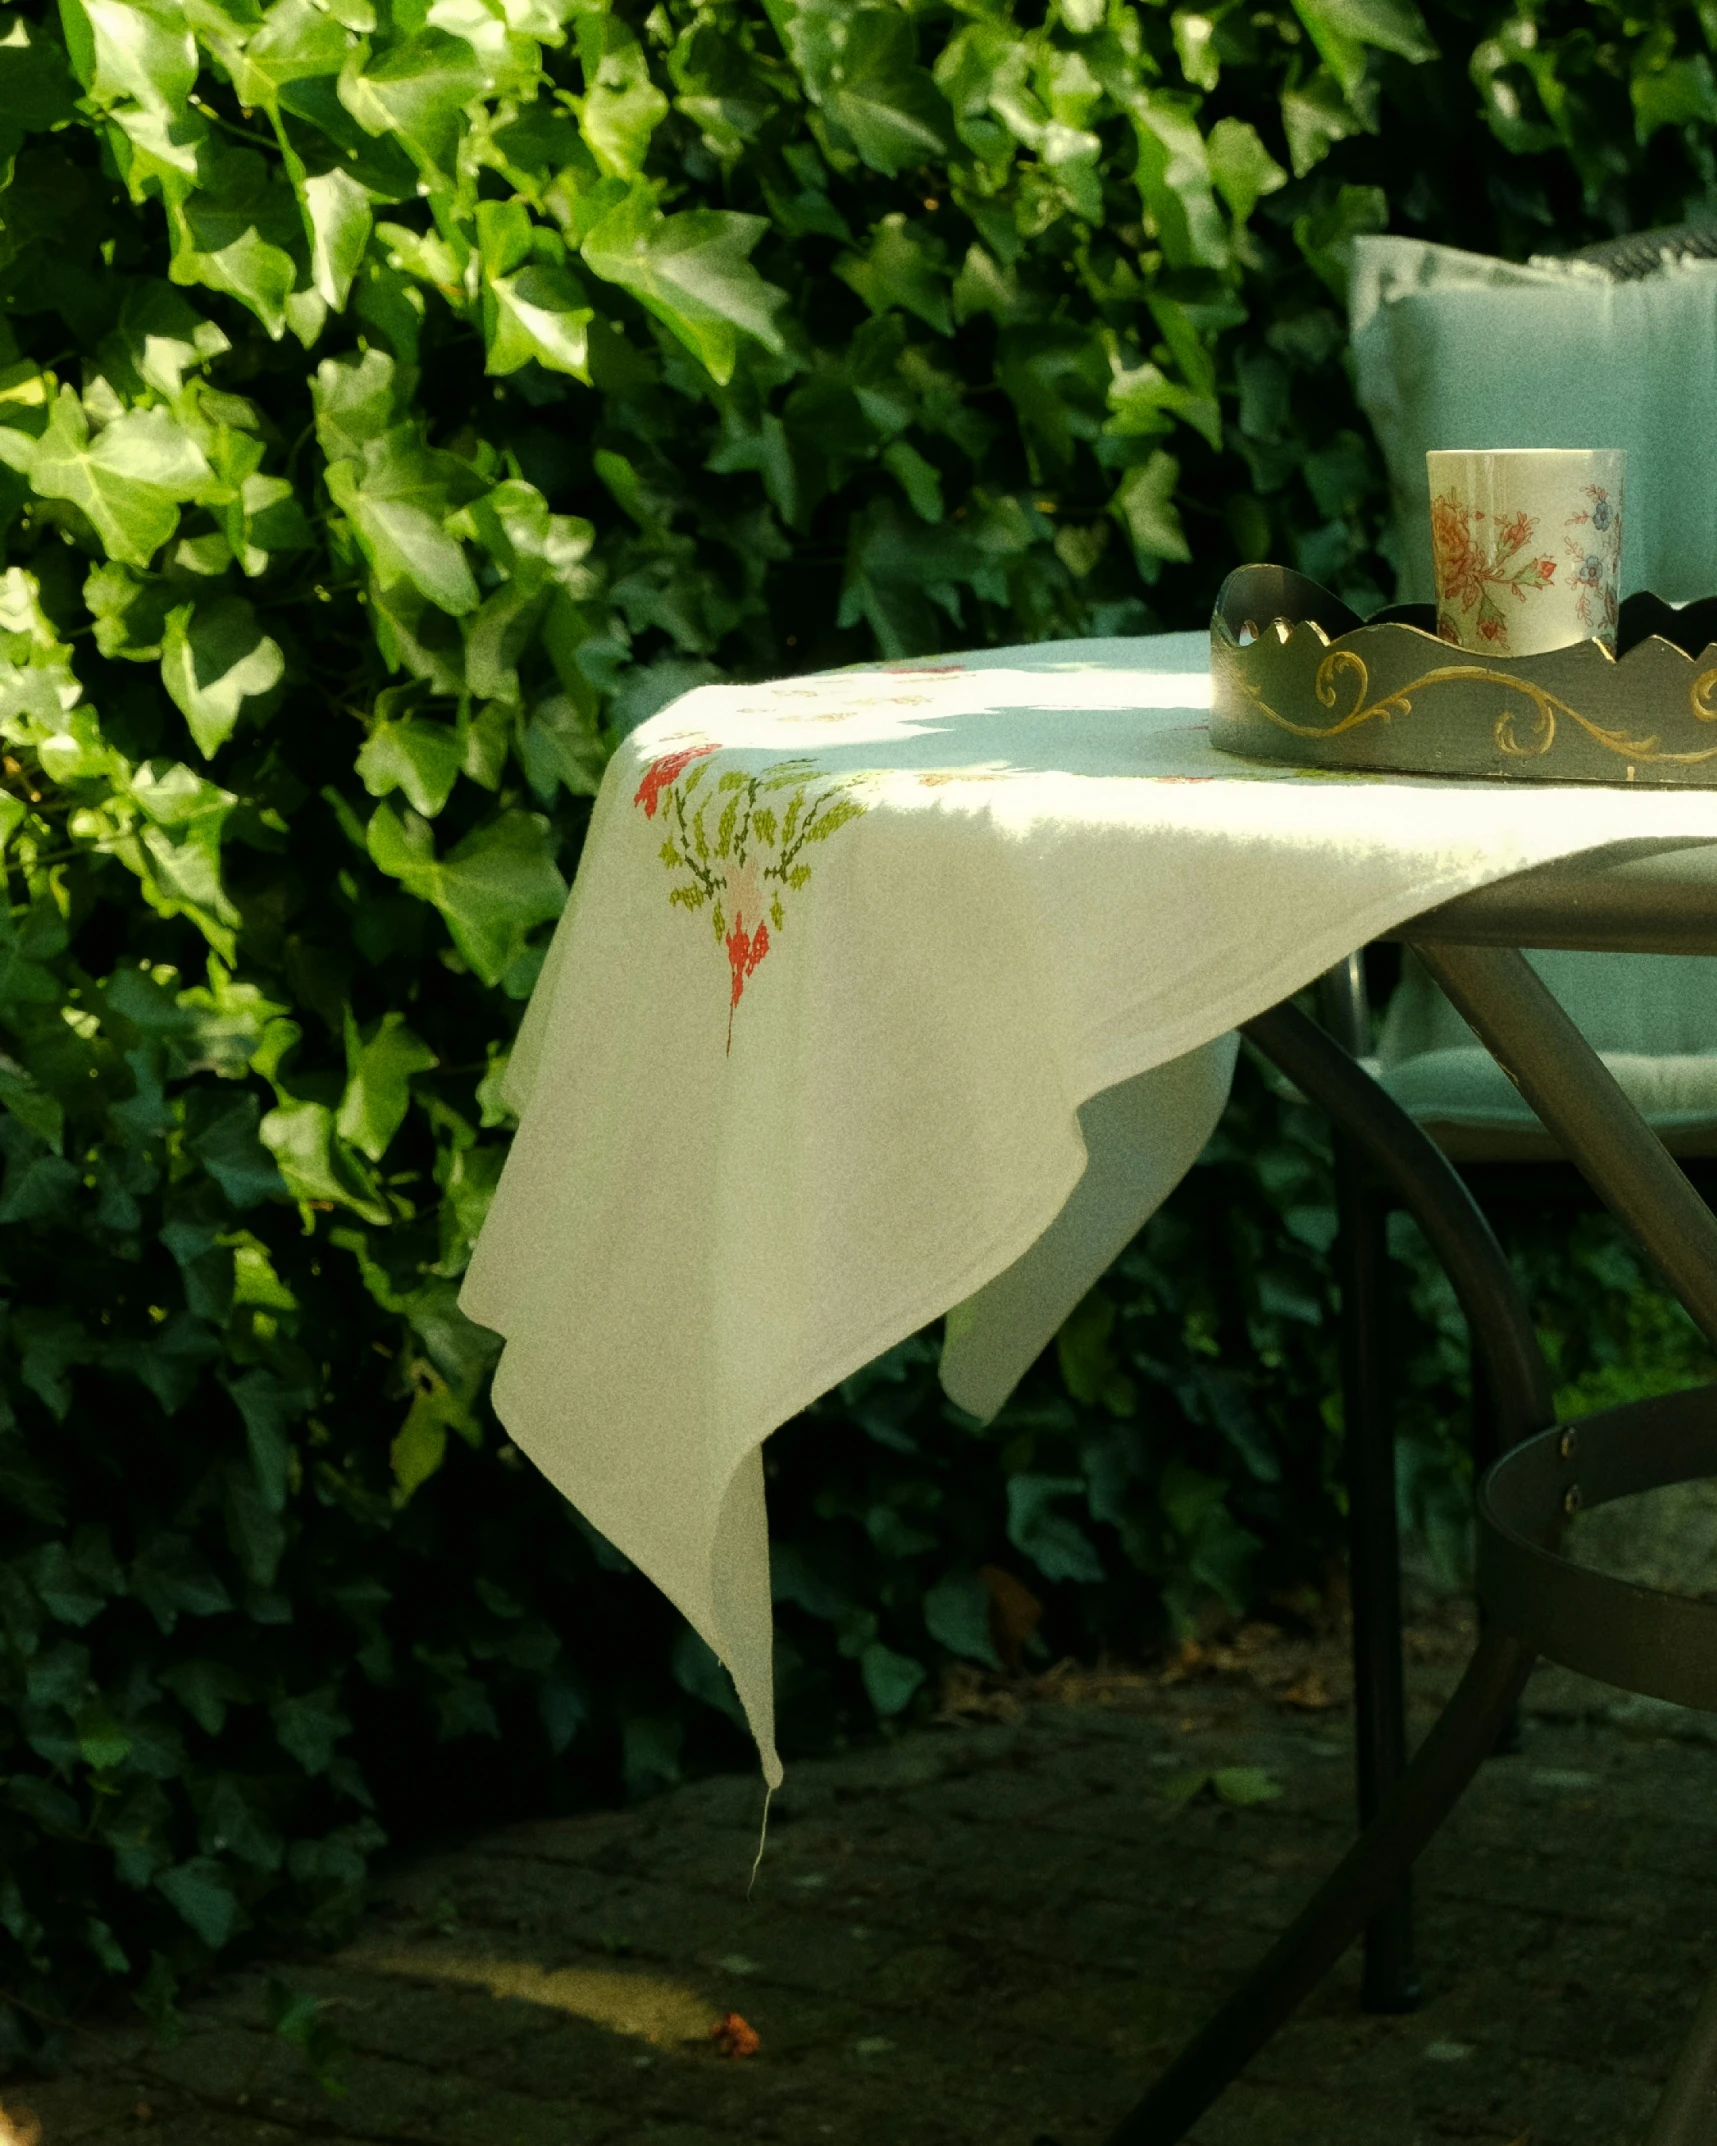 a chair is next to a table with a white and green tablecloth on it